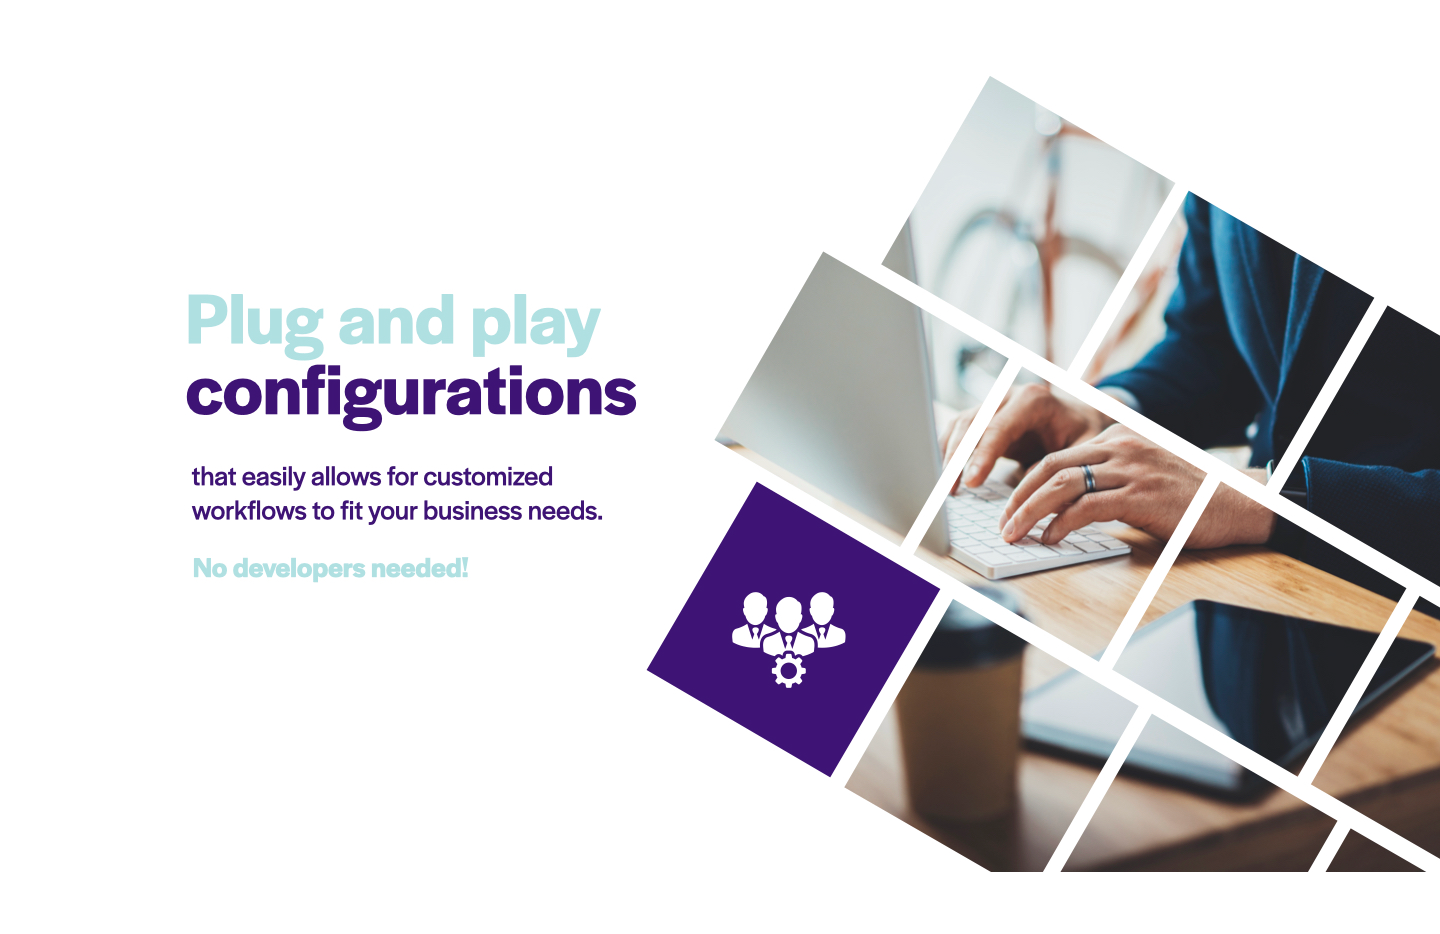 Plug-and-play configurations and customizations that fit any business workflow.